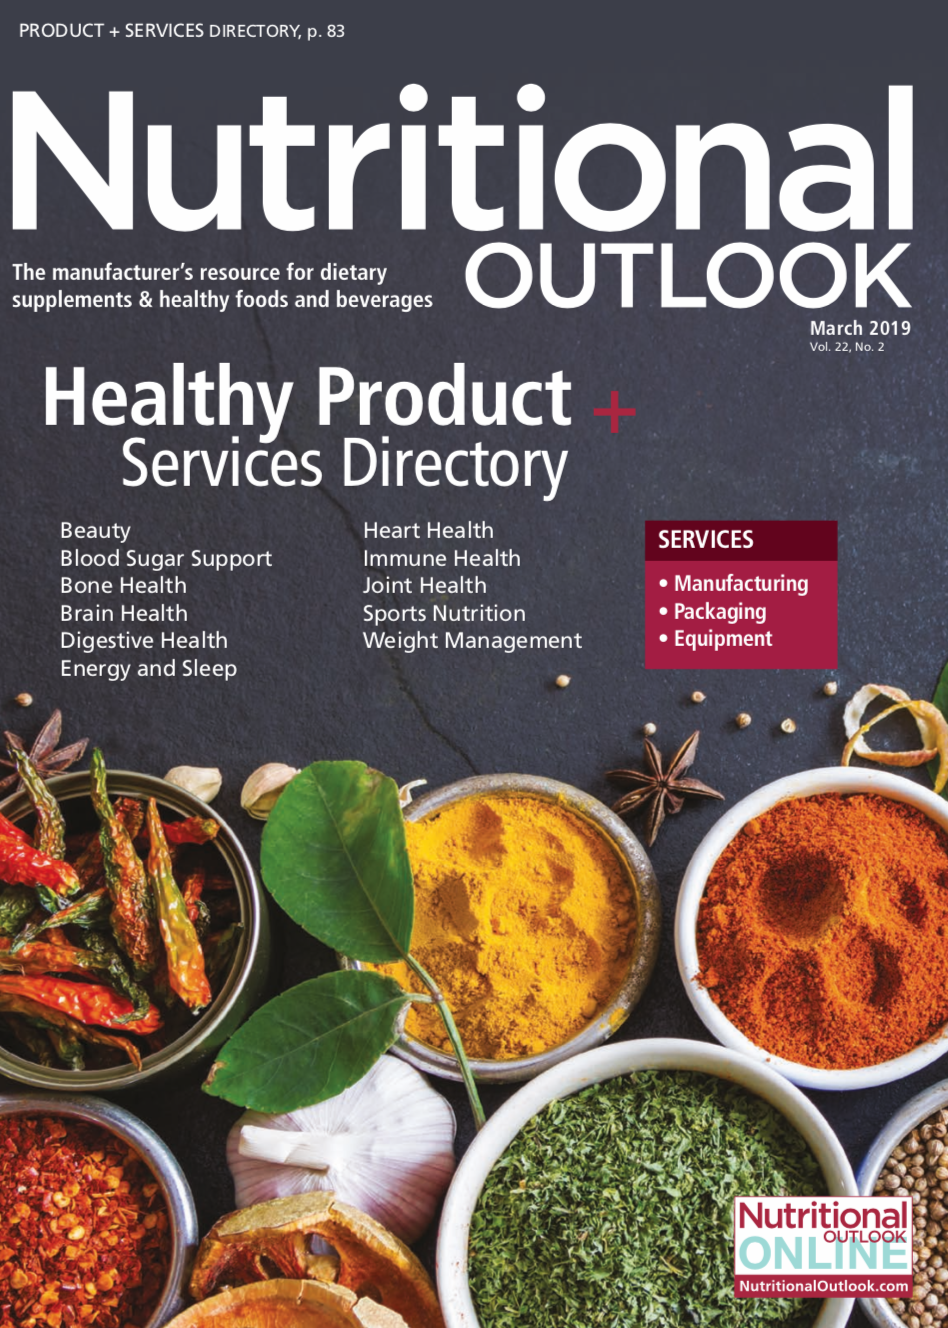 Nutritional Outlook Vol. 22 No. 2